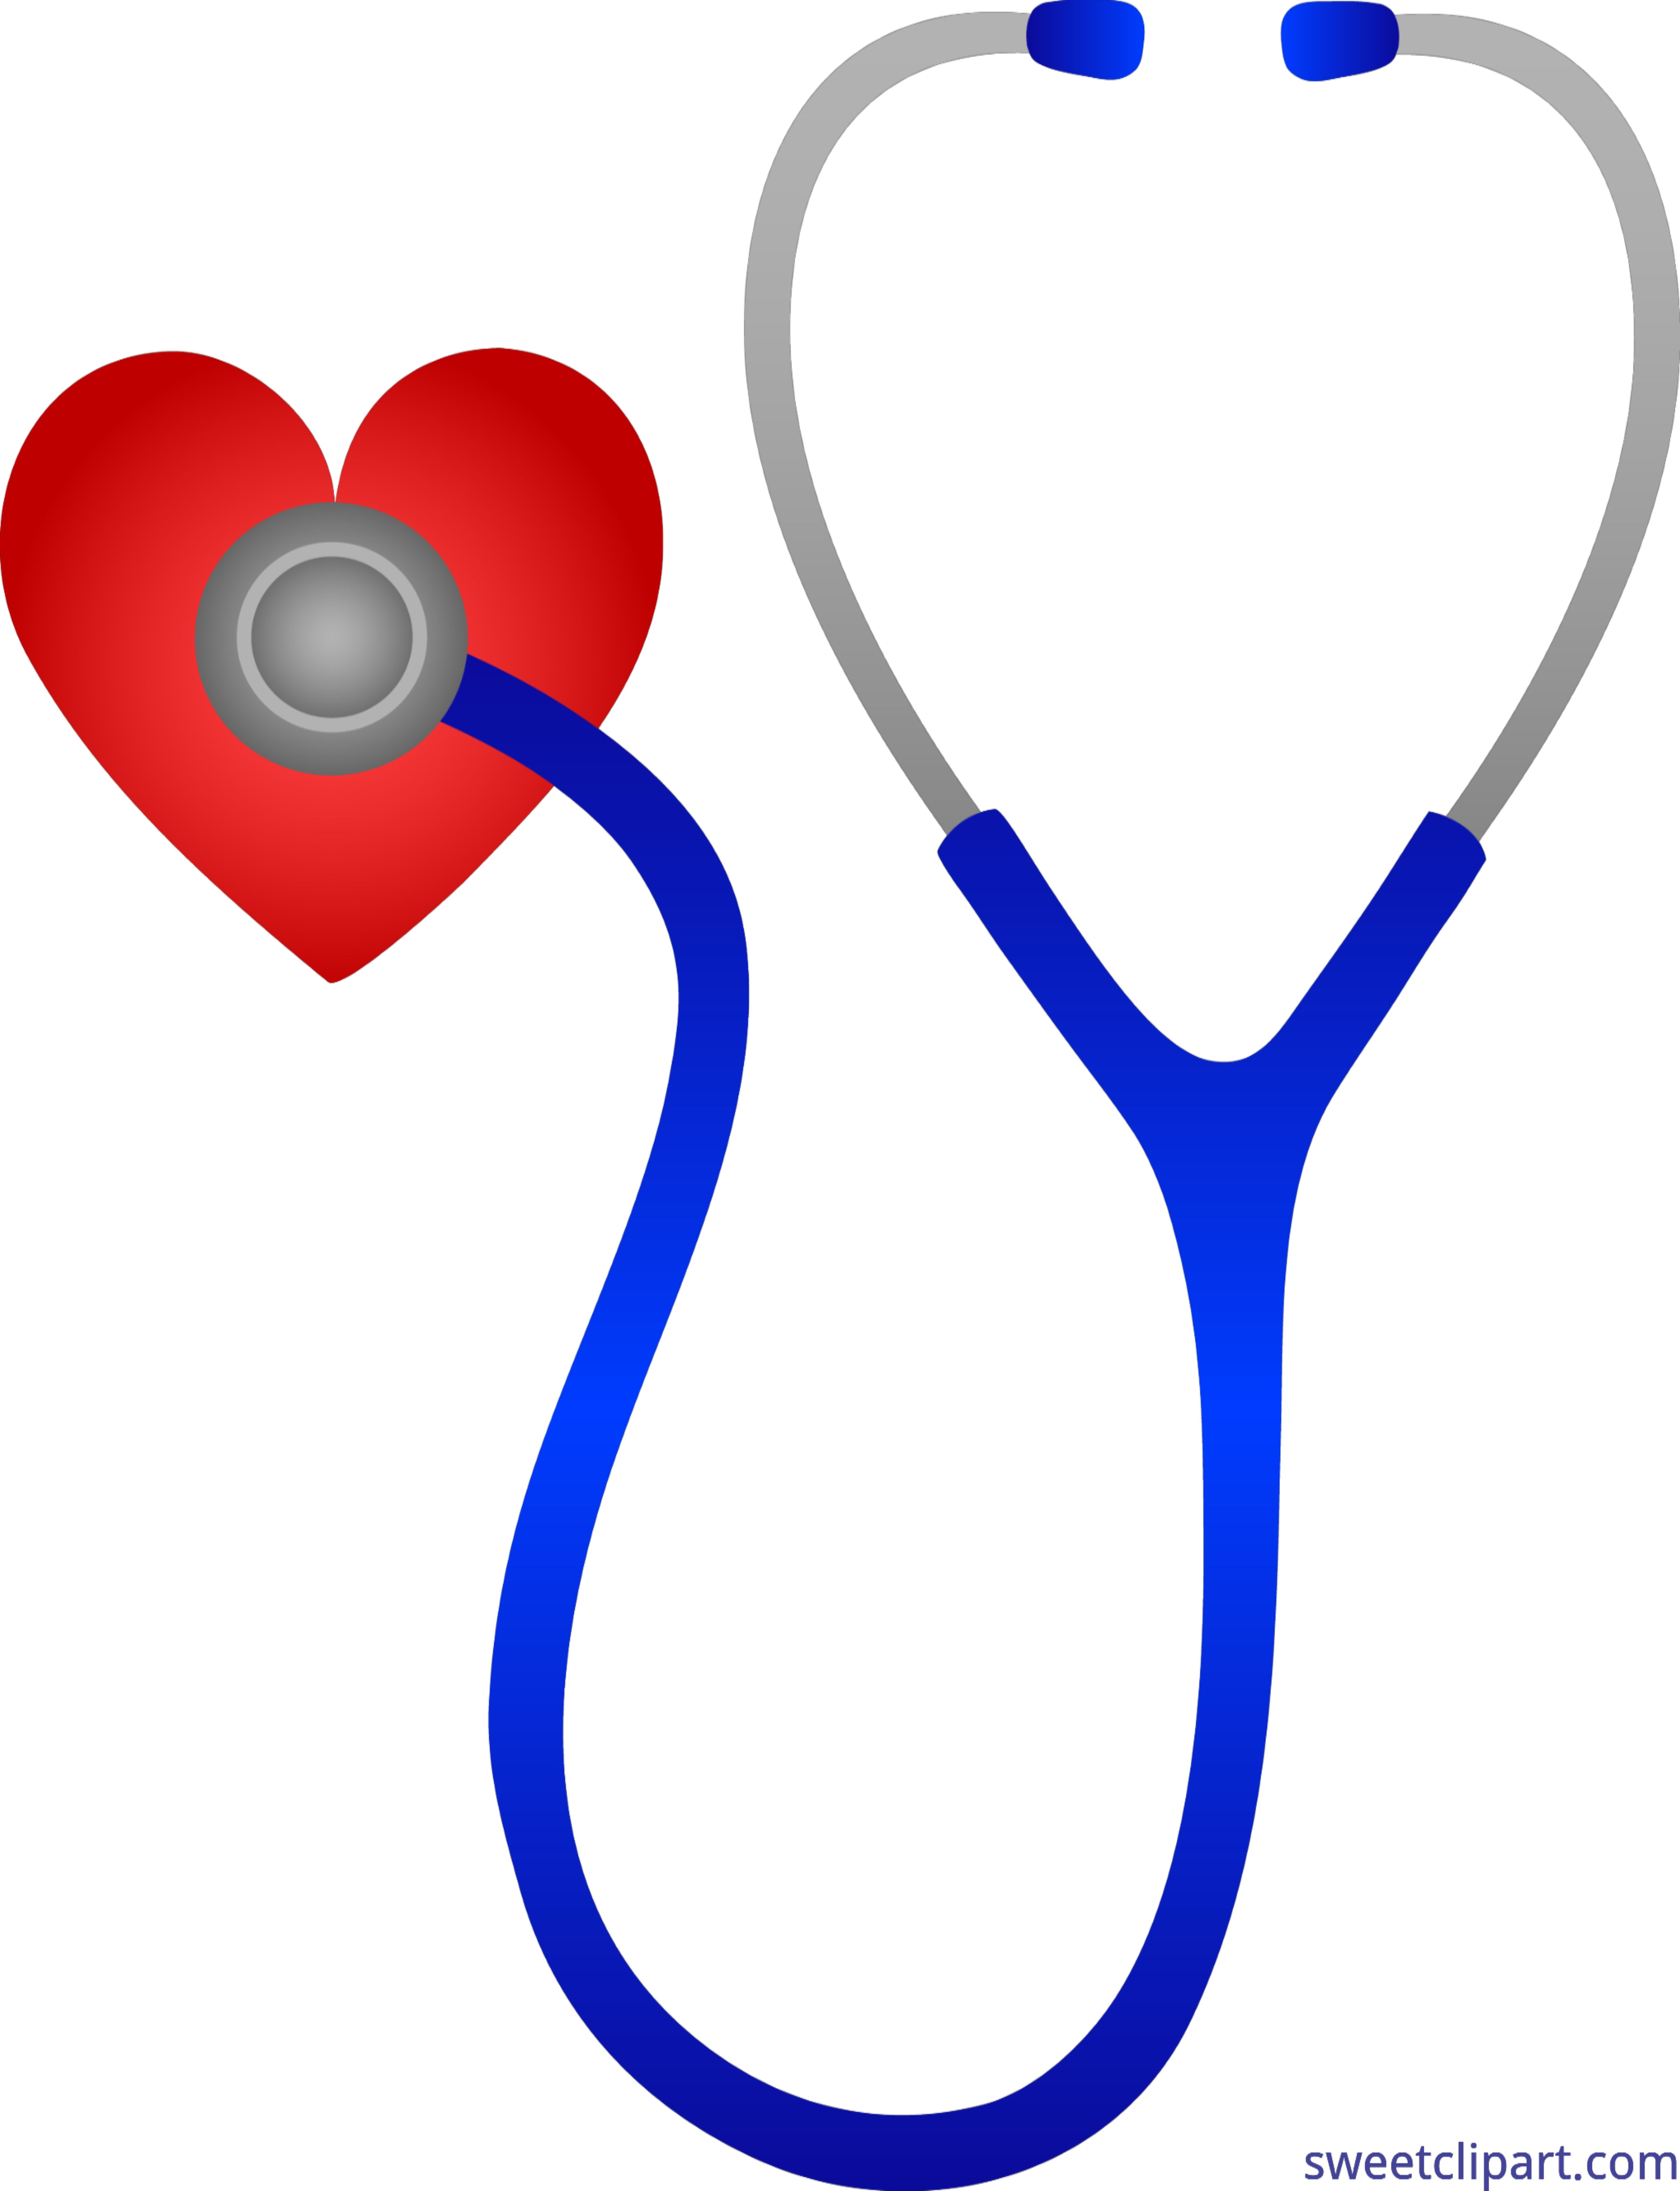 Doctors Stethoscope With Heart Clip Art.